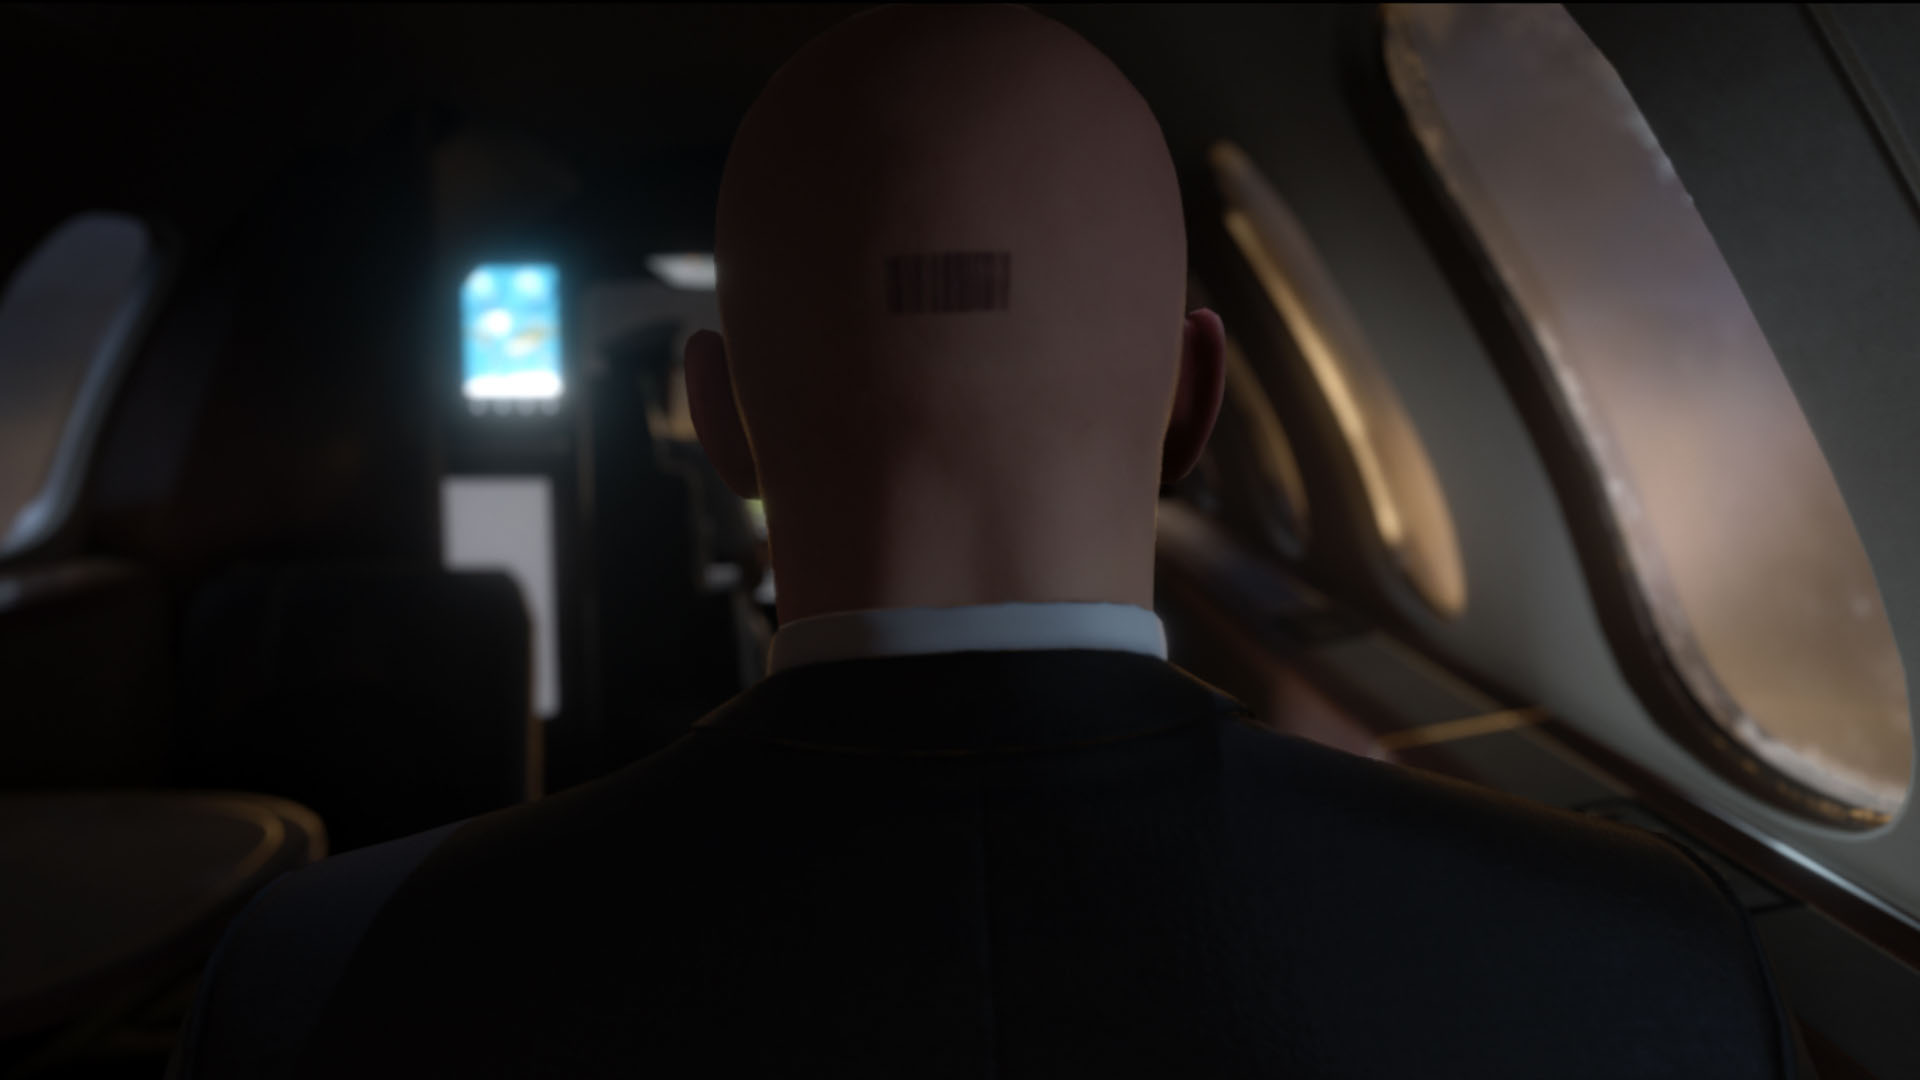 Square Enix Hitman for PlayStation 4 - image 3 of 9